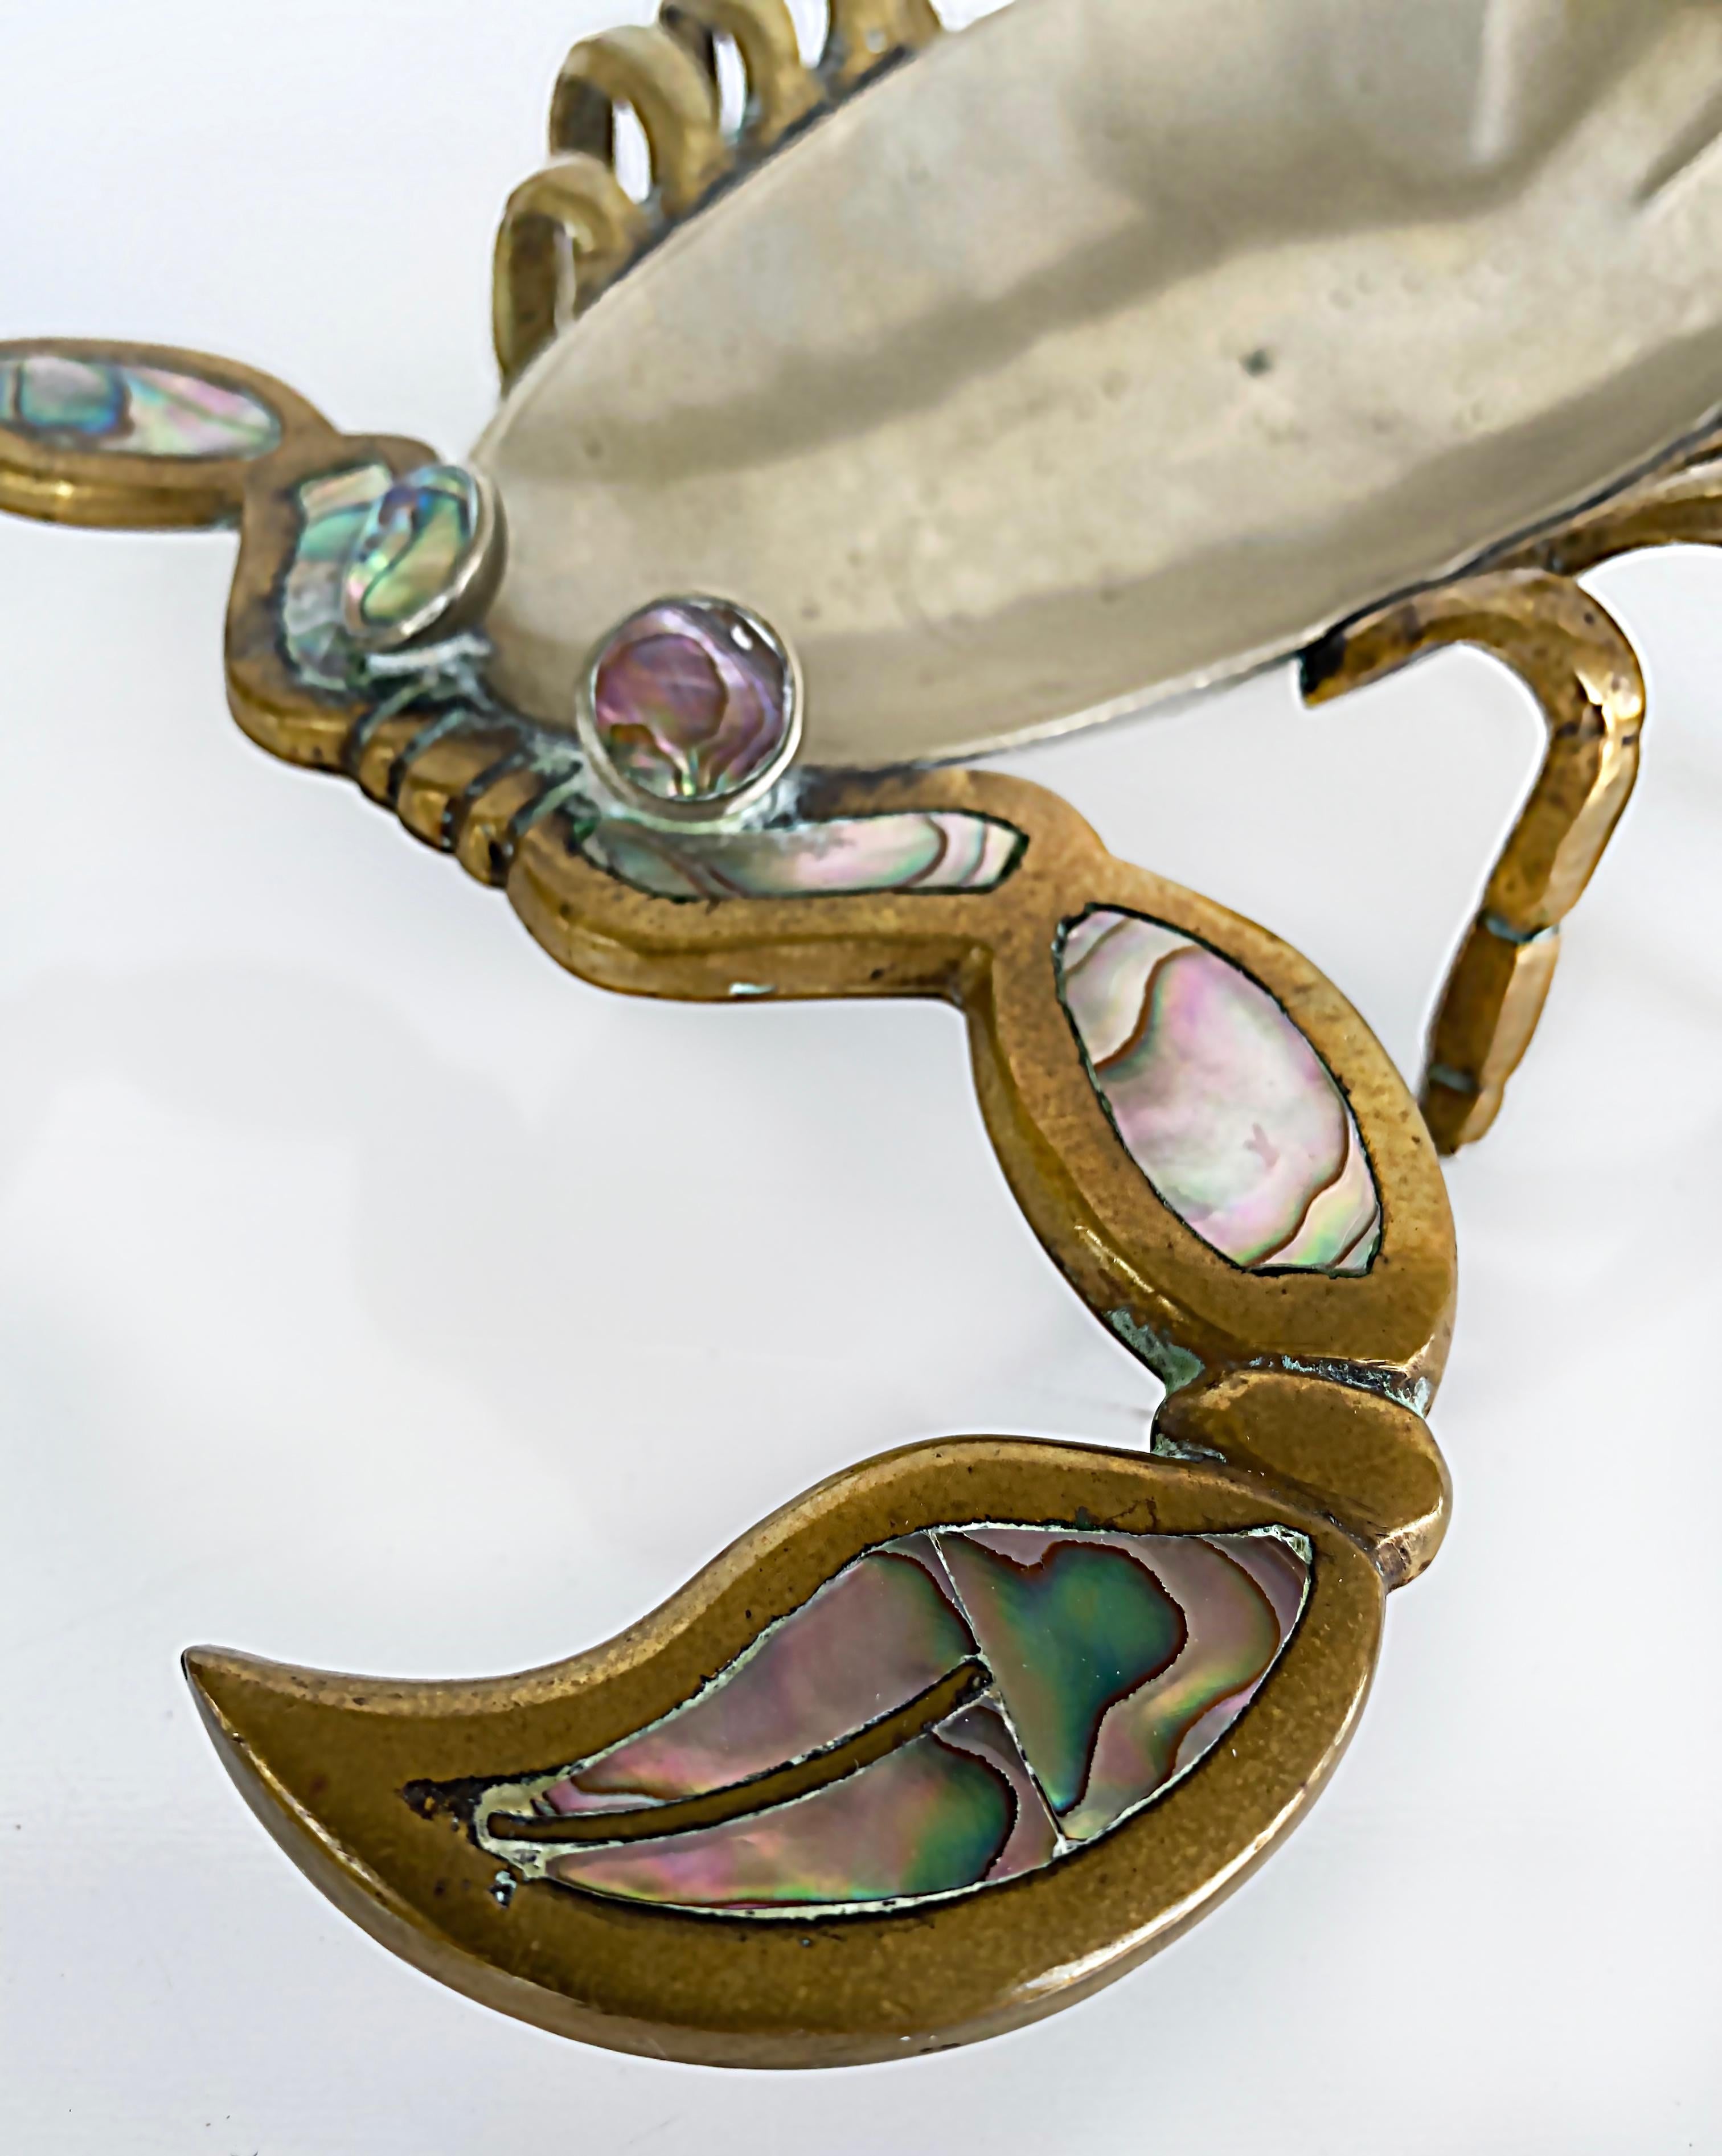 1960s mixed metals/Abalone Scorpion Tray, Los Castillo Style, Mexican

Offered for sale is a Mexican Mid-Century Modern mixed metals tray with abalone that has been created in the style of Los Castillo. The scorpion is made from brass and copper